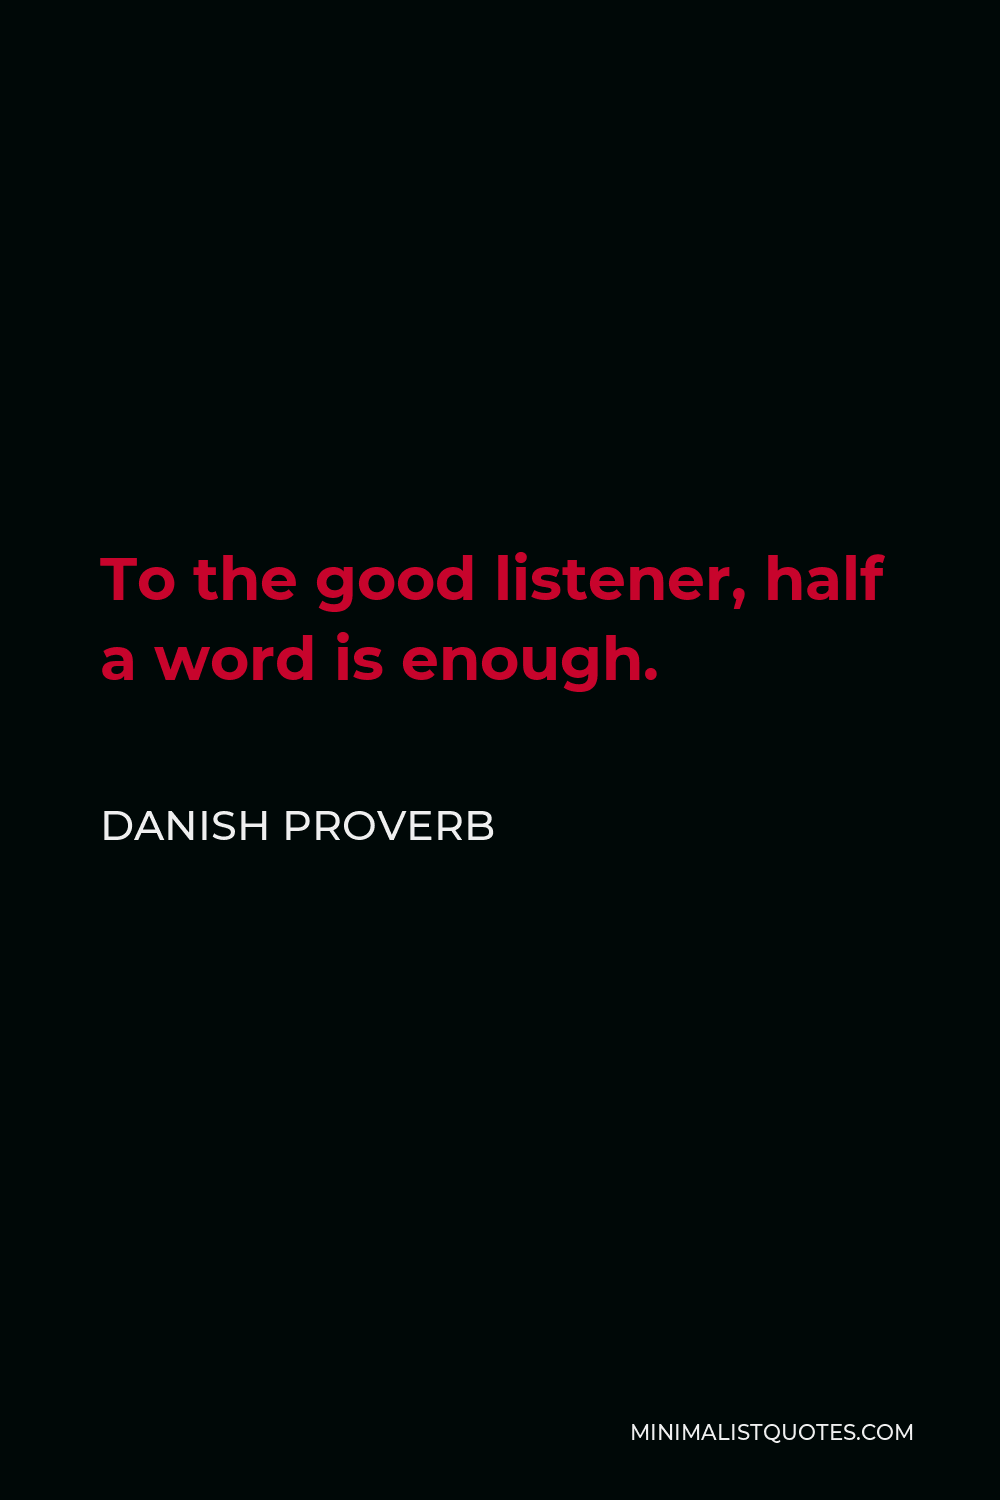 Danish Proverb Quote - To the good listener, half a word is enough.